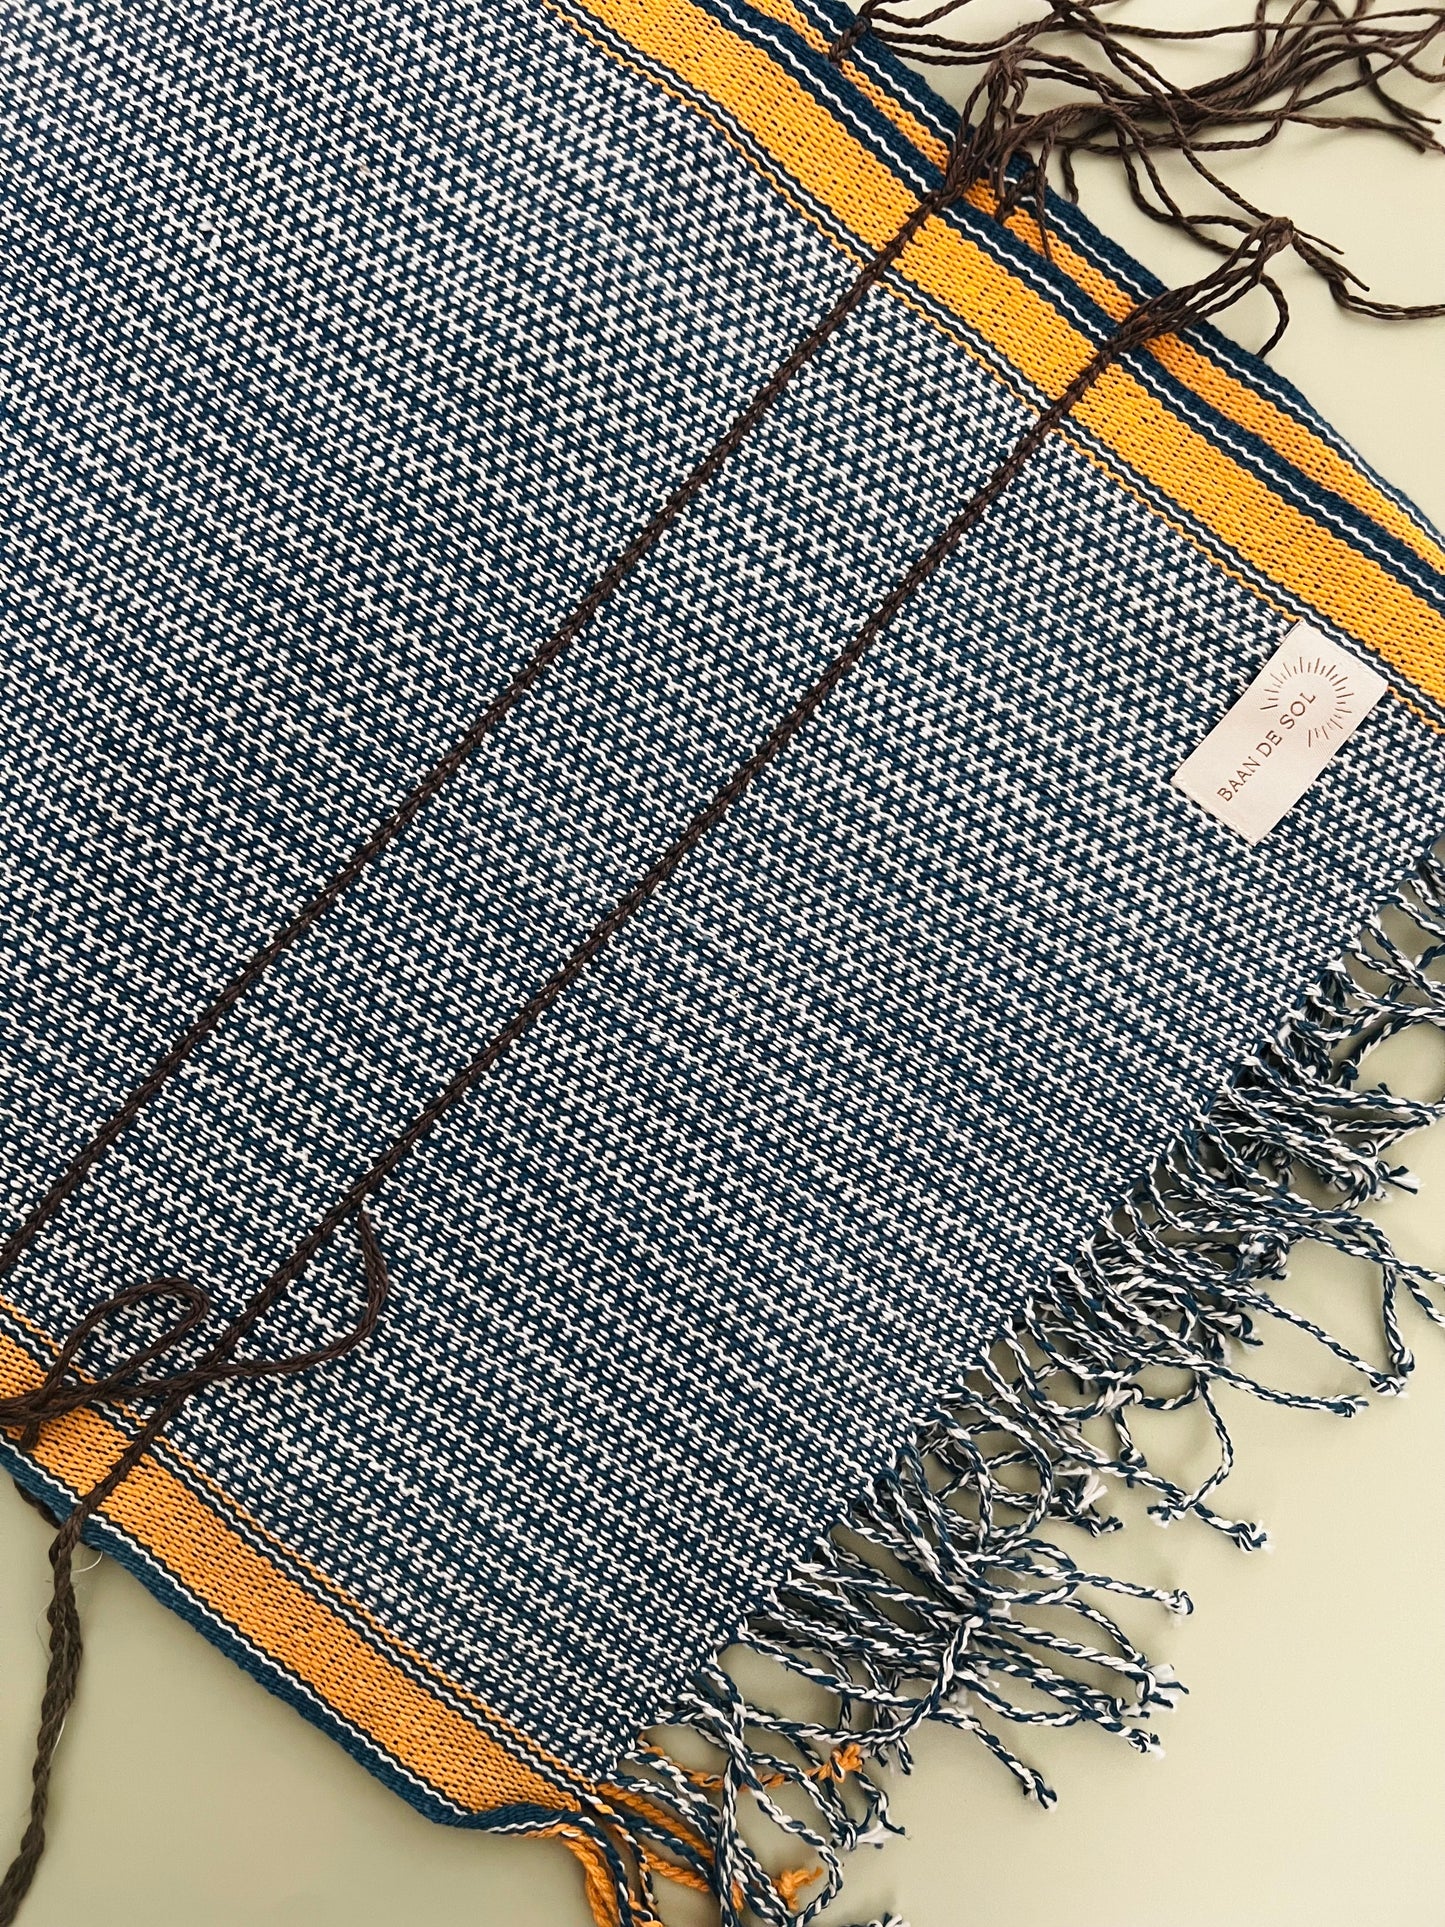 Handwoven  & Hand-dyed Table Runner